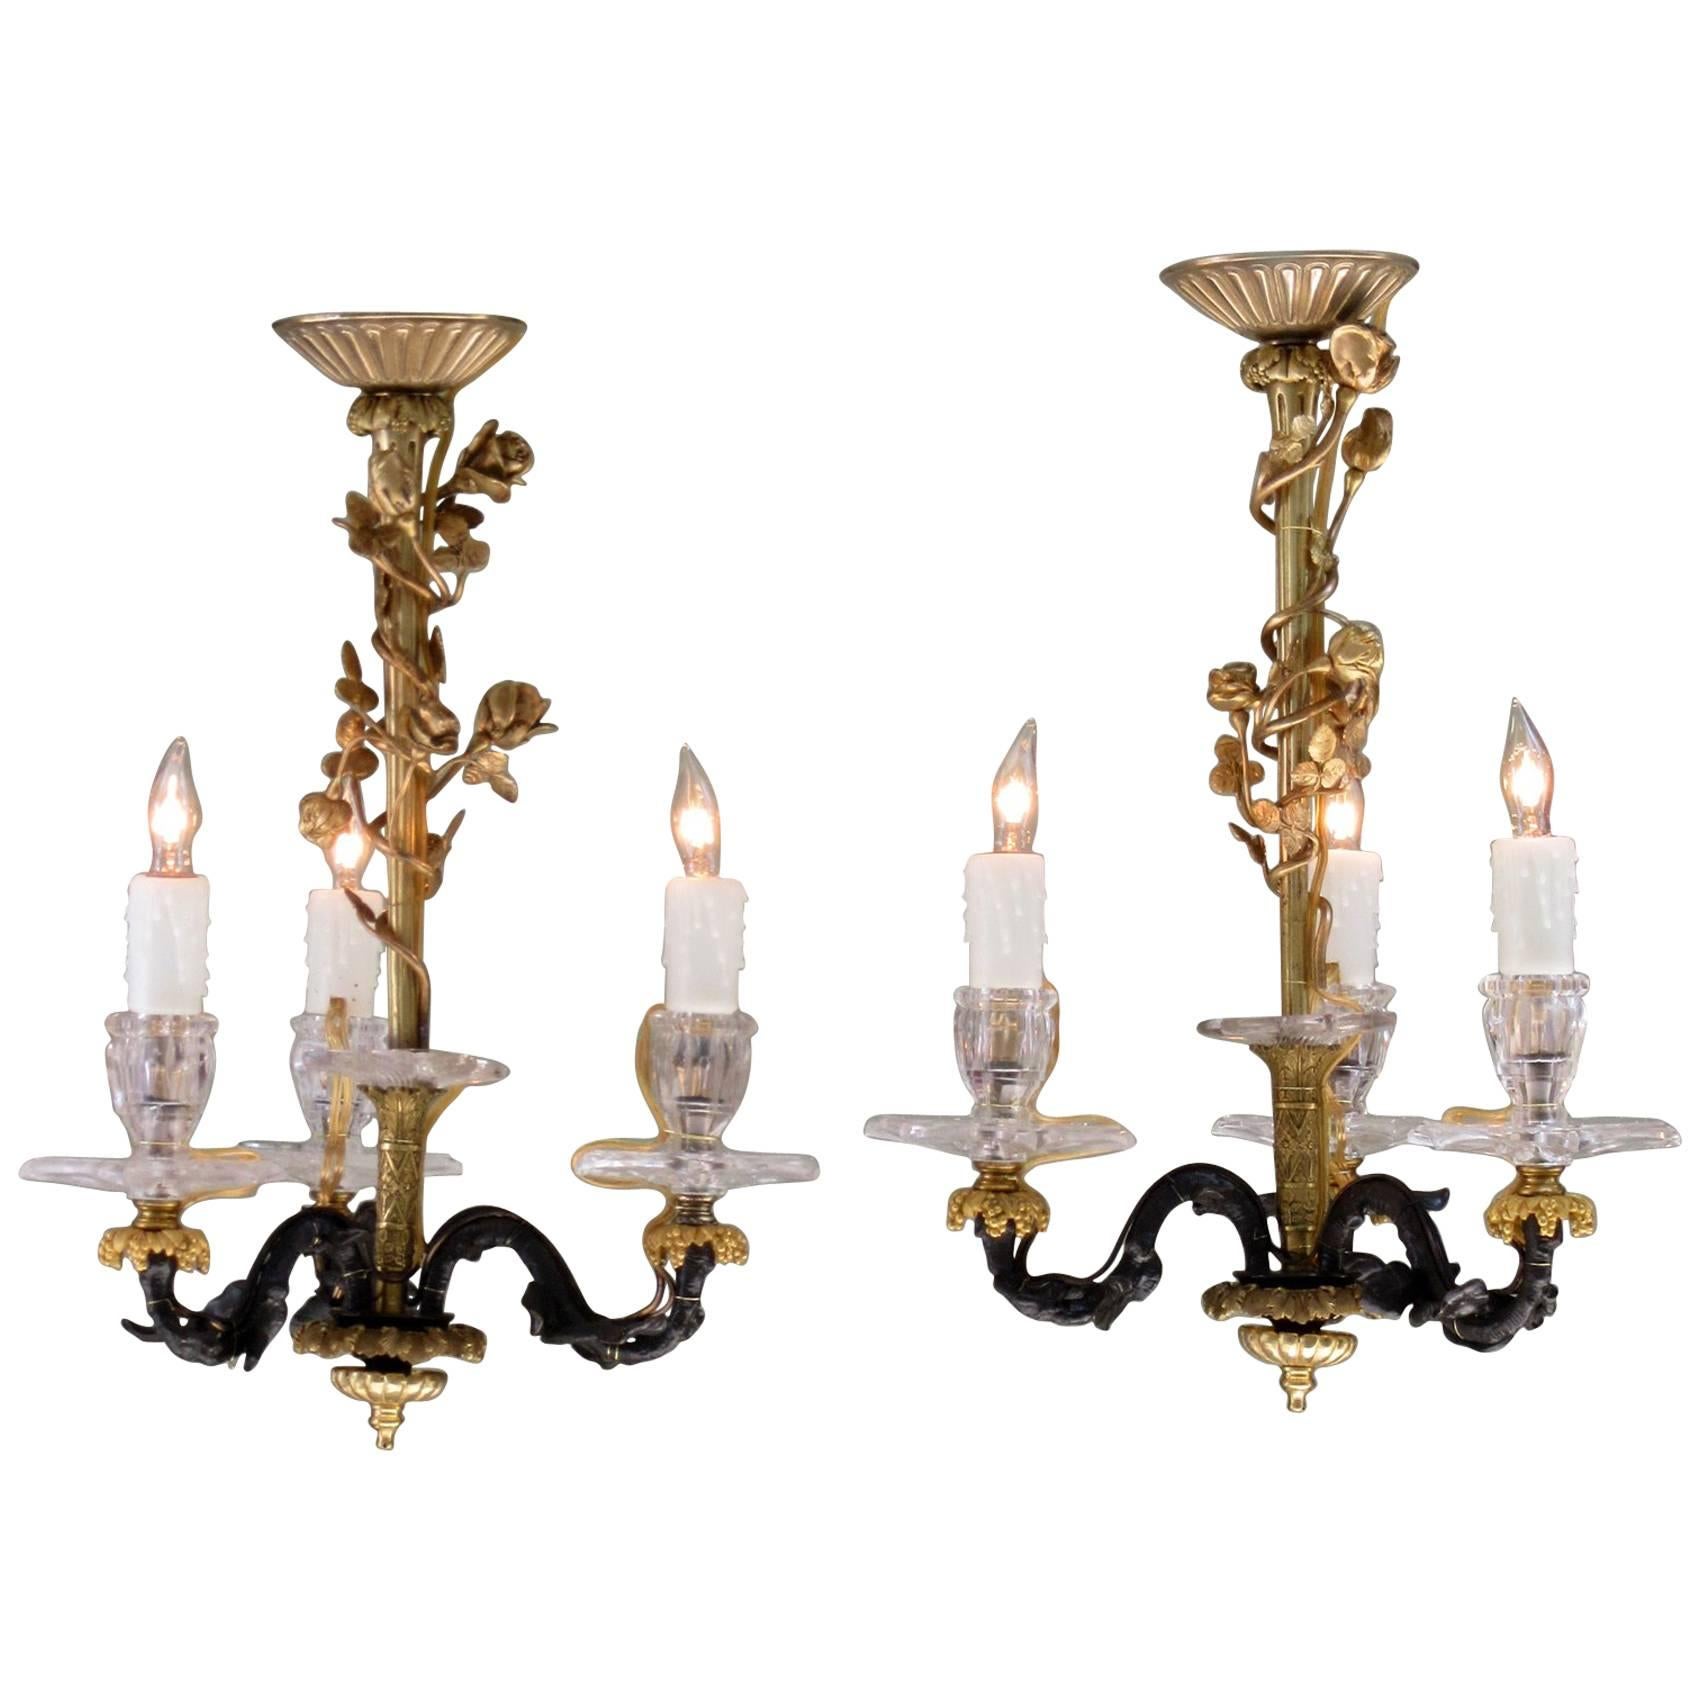 Pair of Small 19th Century French Louis XIV Bronze Dore Rock Crystal Chandeliers